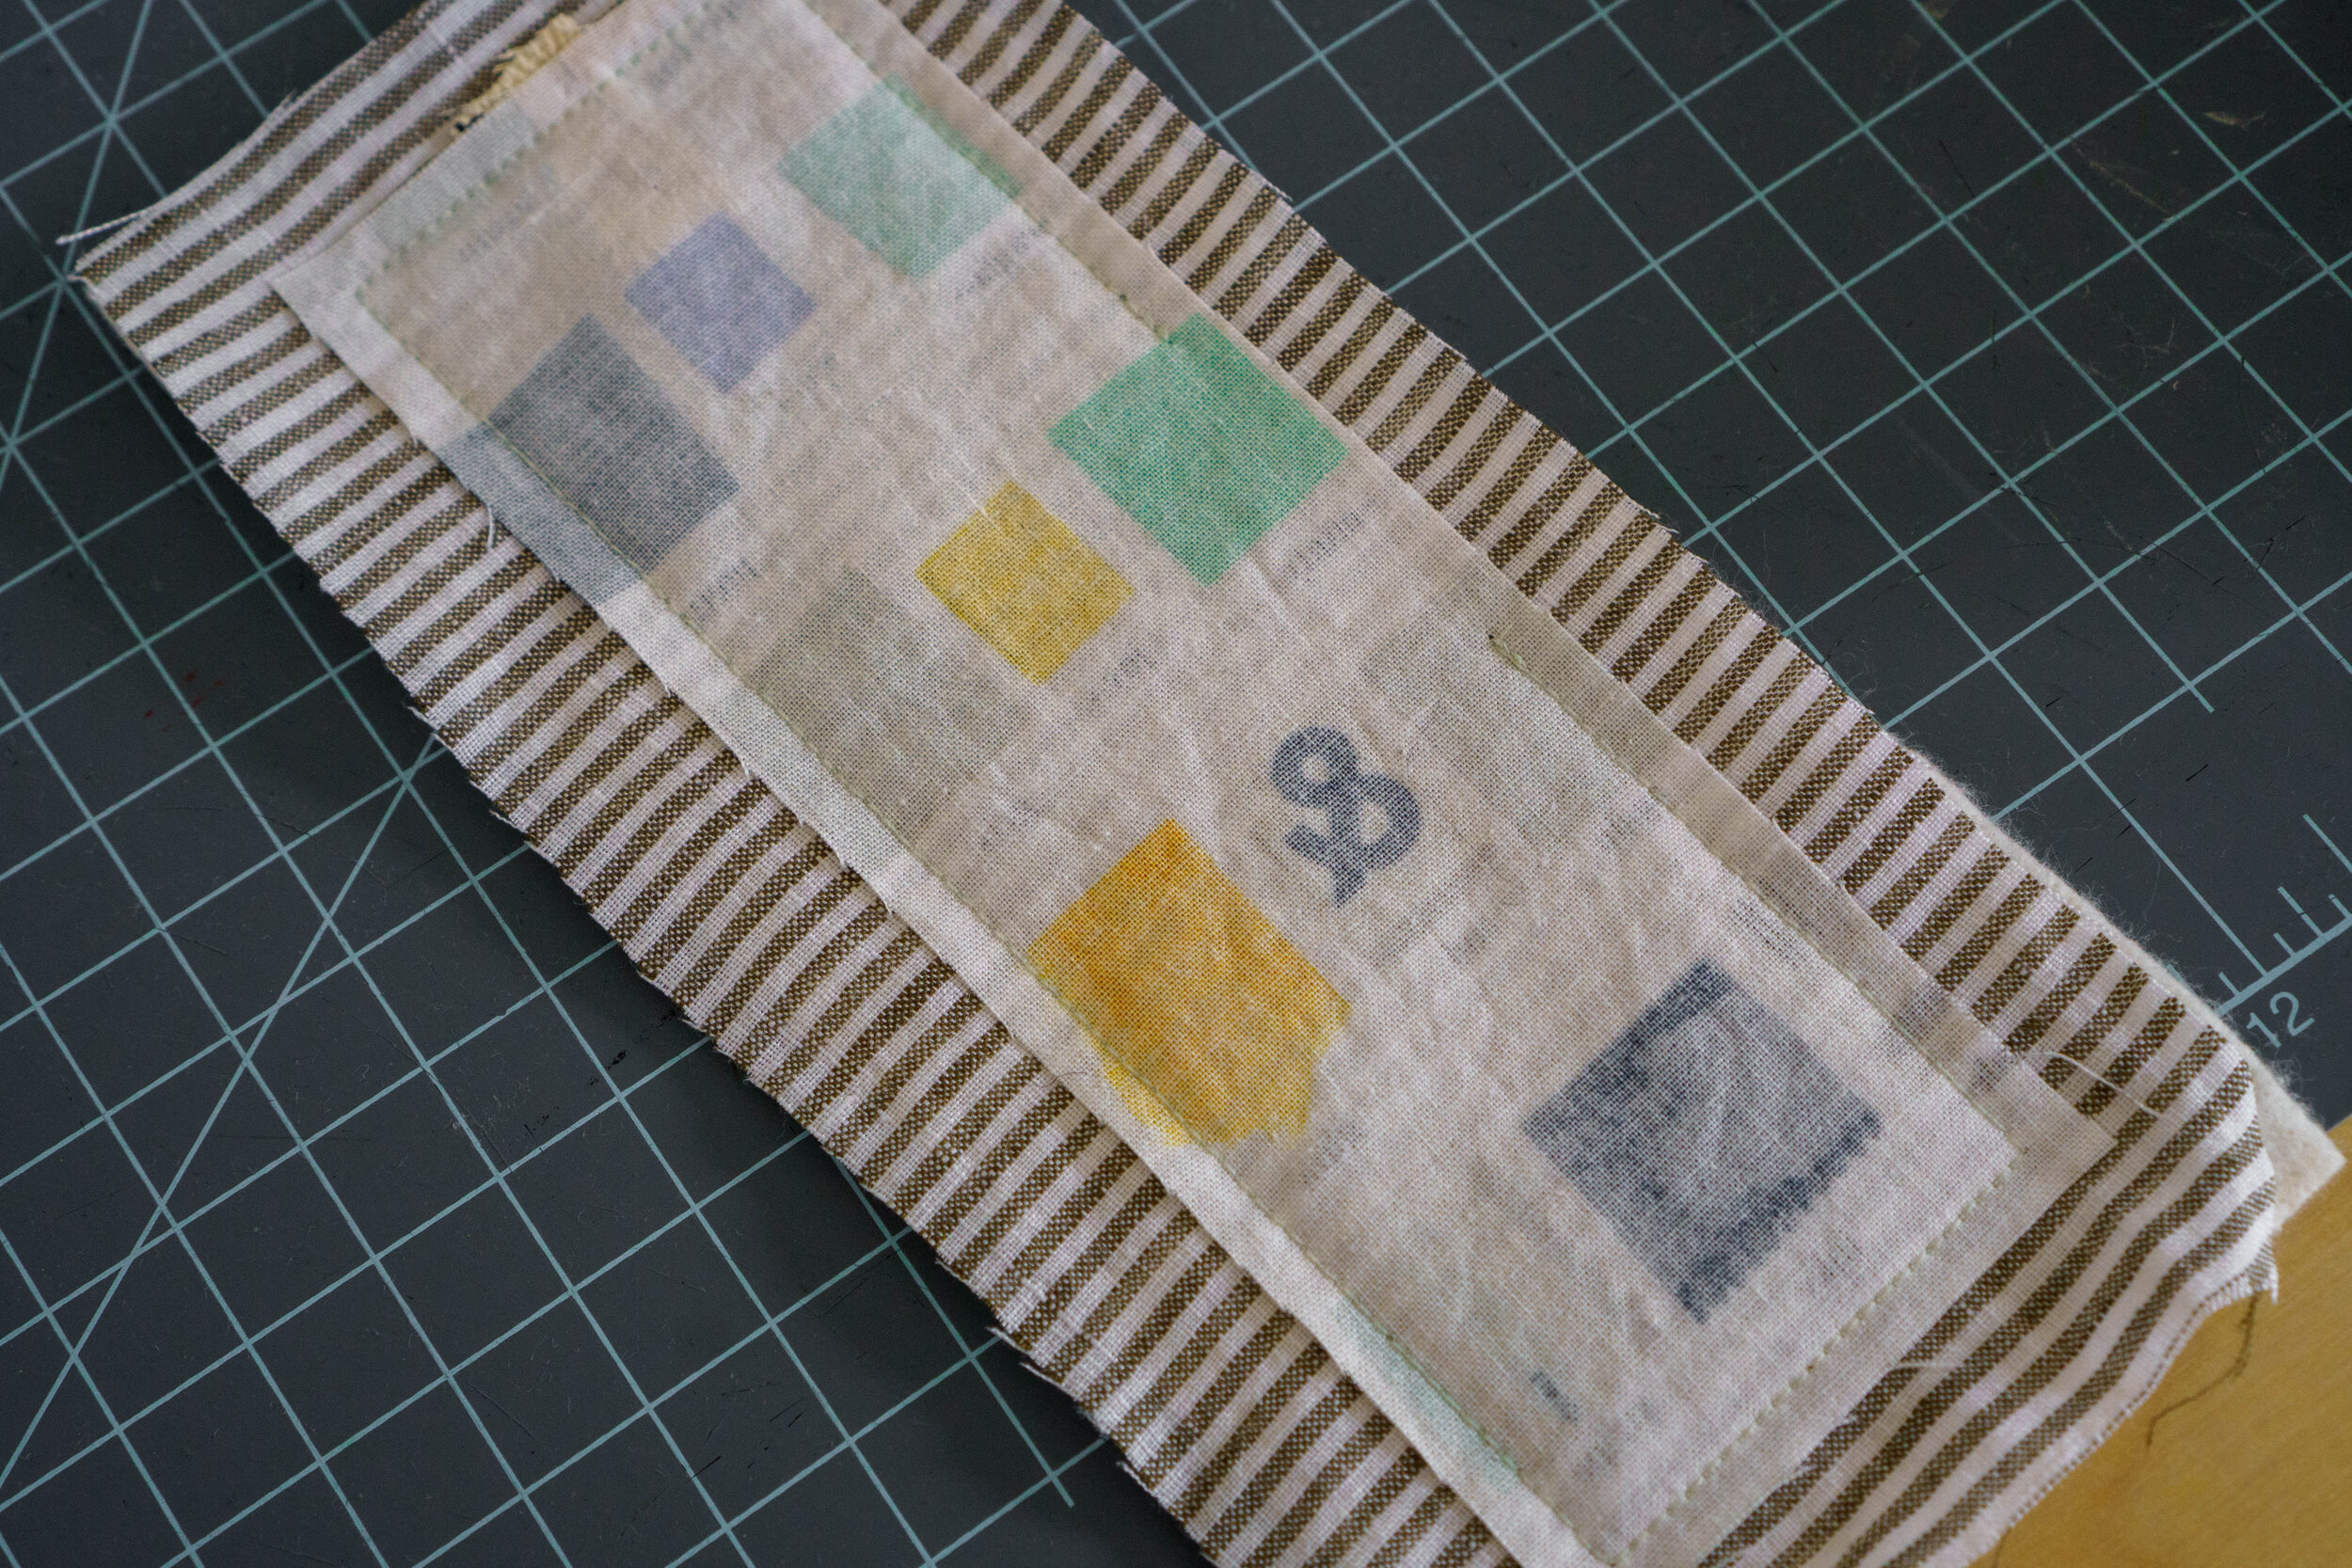 How to Make Quilted Fabric Bookmarks - WeAllSew